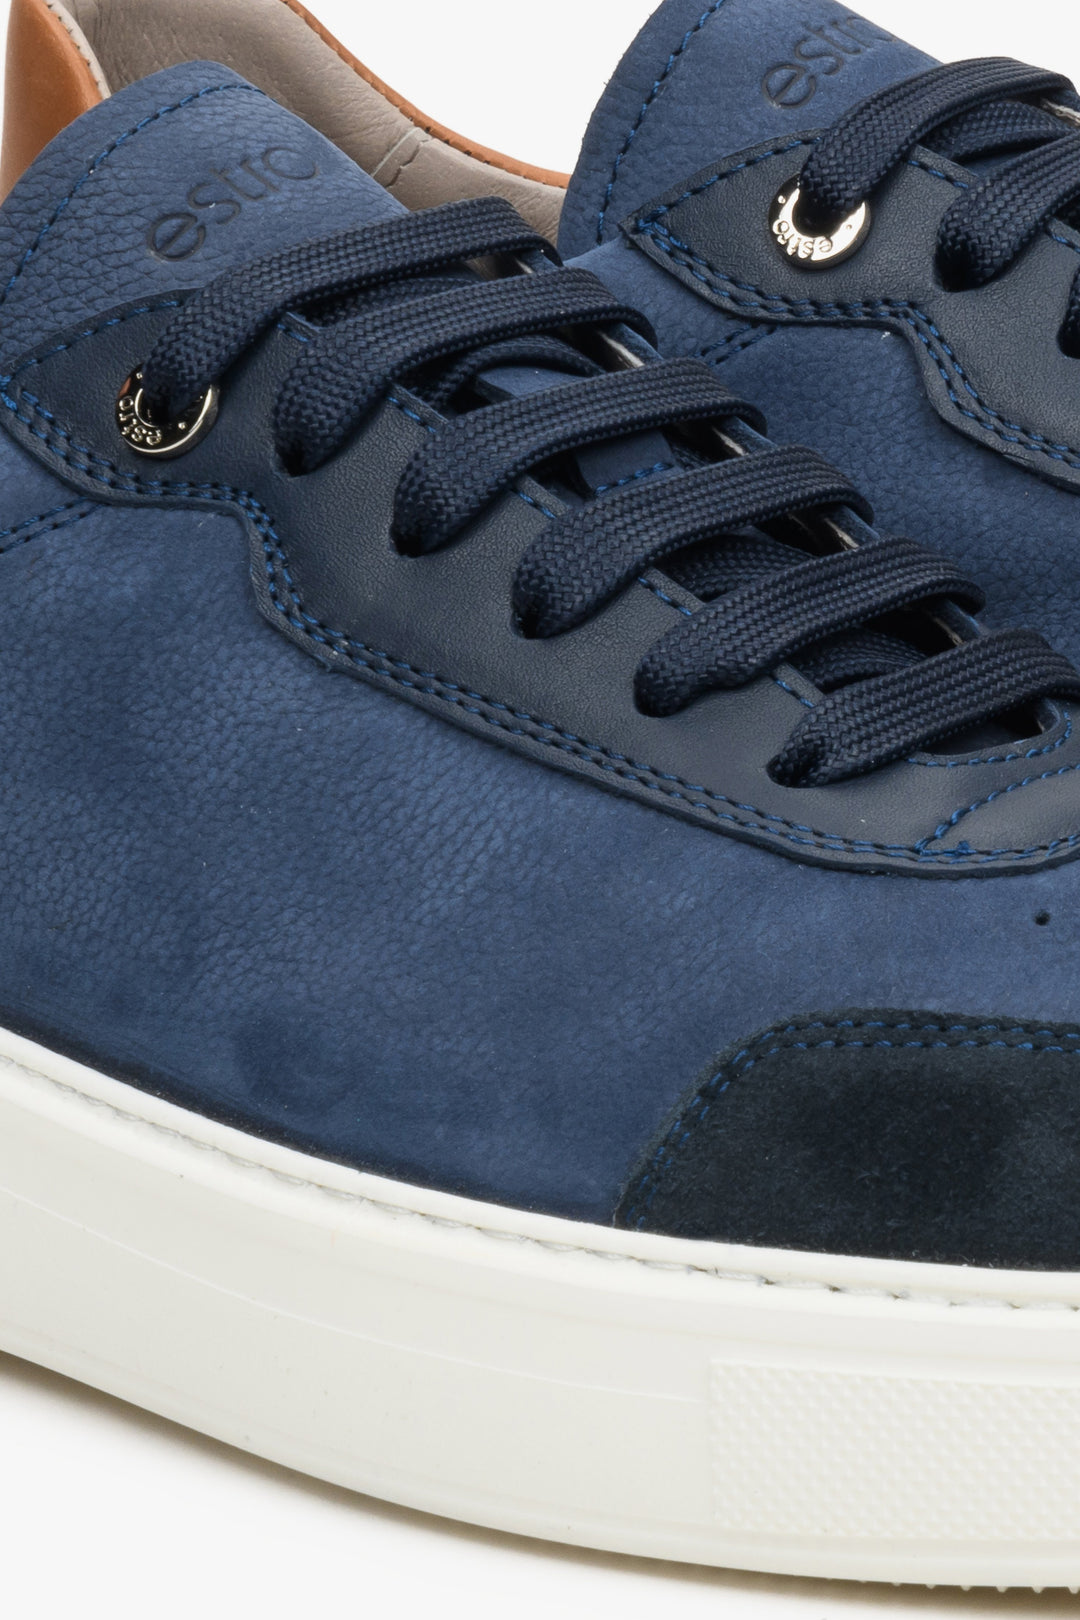 Estro men's blue and brown nubuck and leather lace-up Estro sneakers - close-up of the binding system.